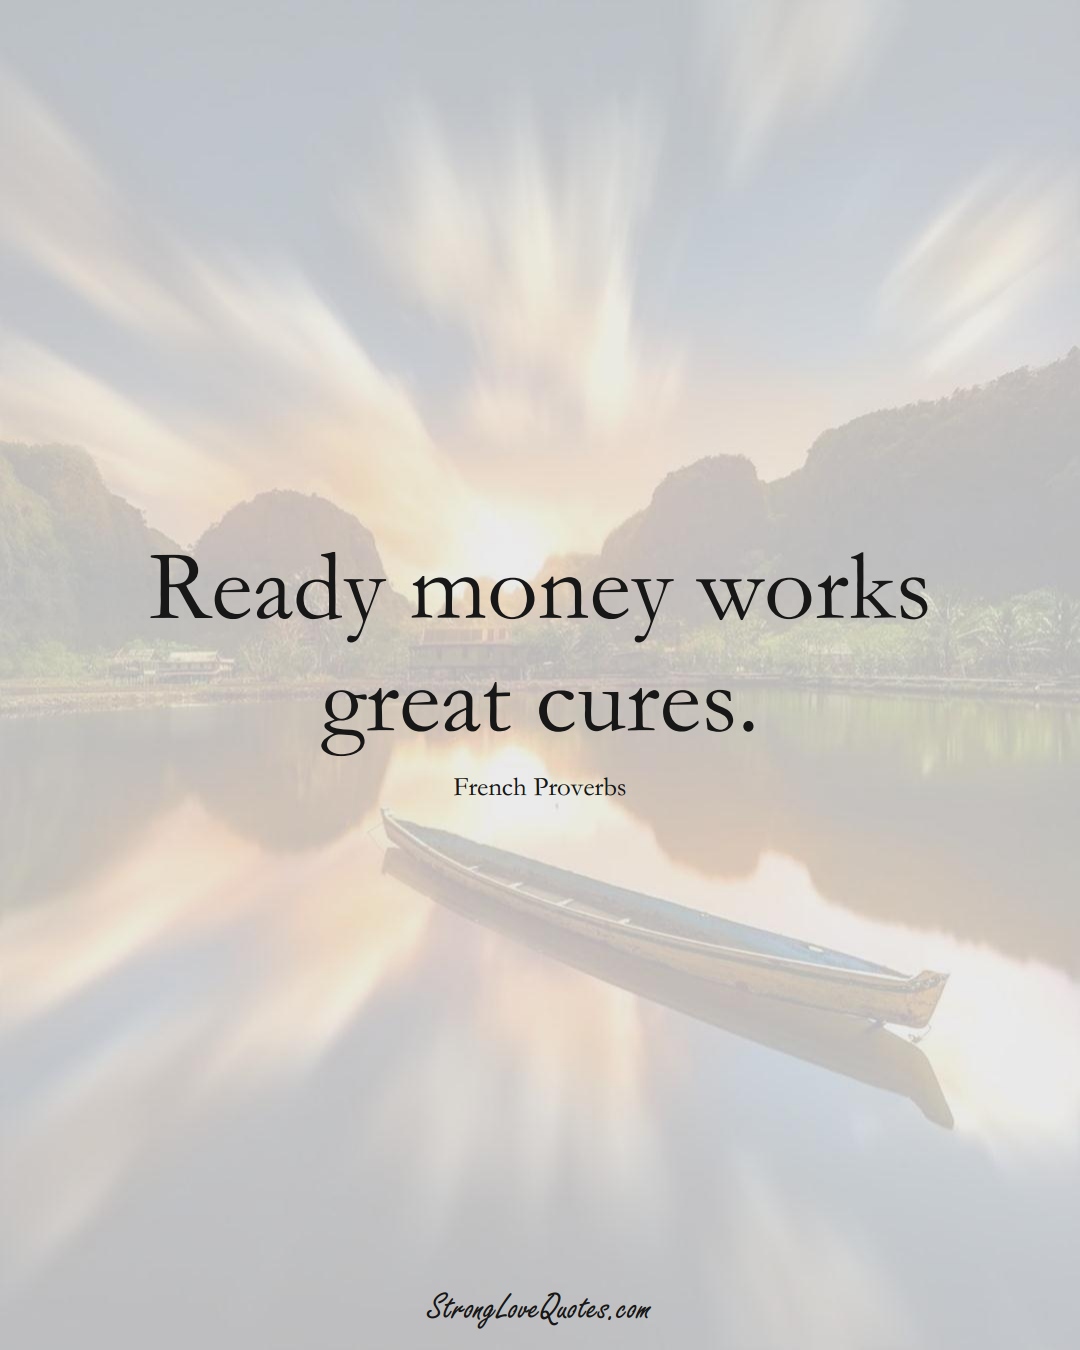 Ready money works great cures. (French Sayings);  #EuropeanSayings